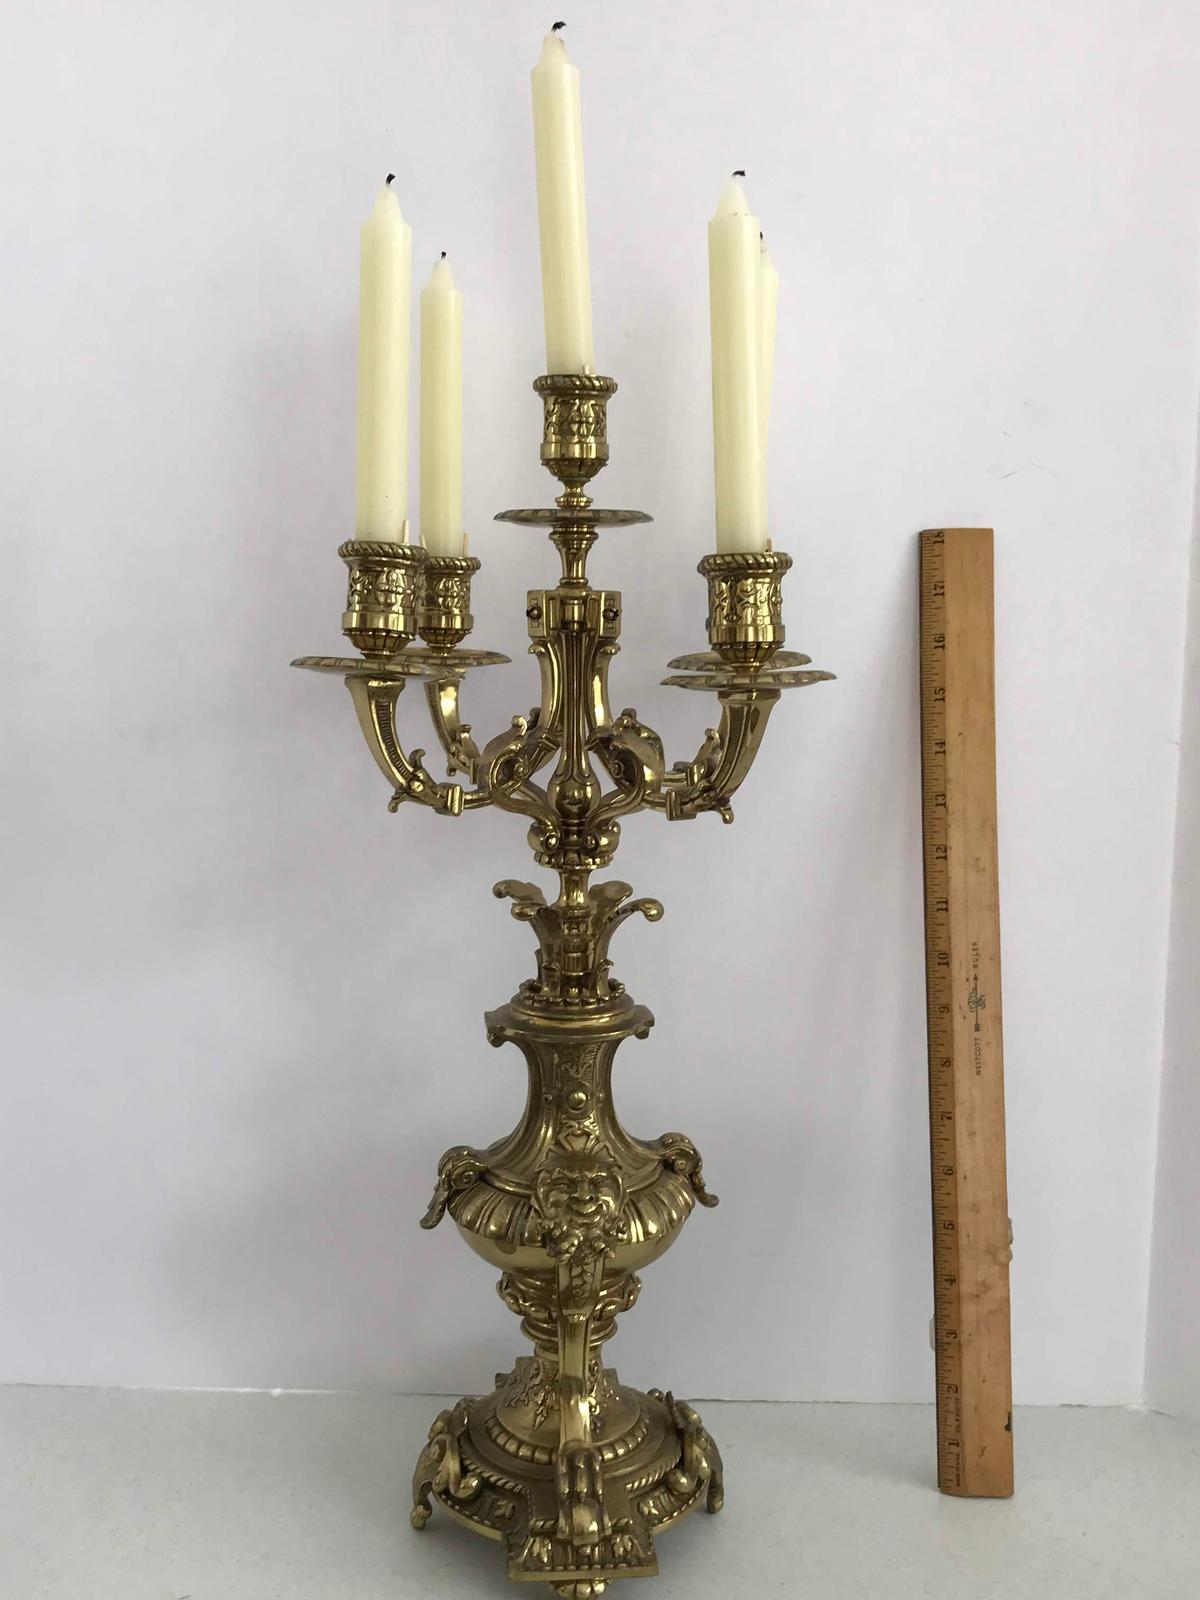 Amazing Vintage Heavy Brass 5 Candle Candelabra with Claw Feet & Face